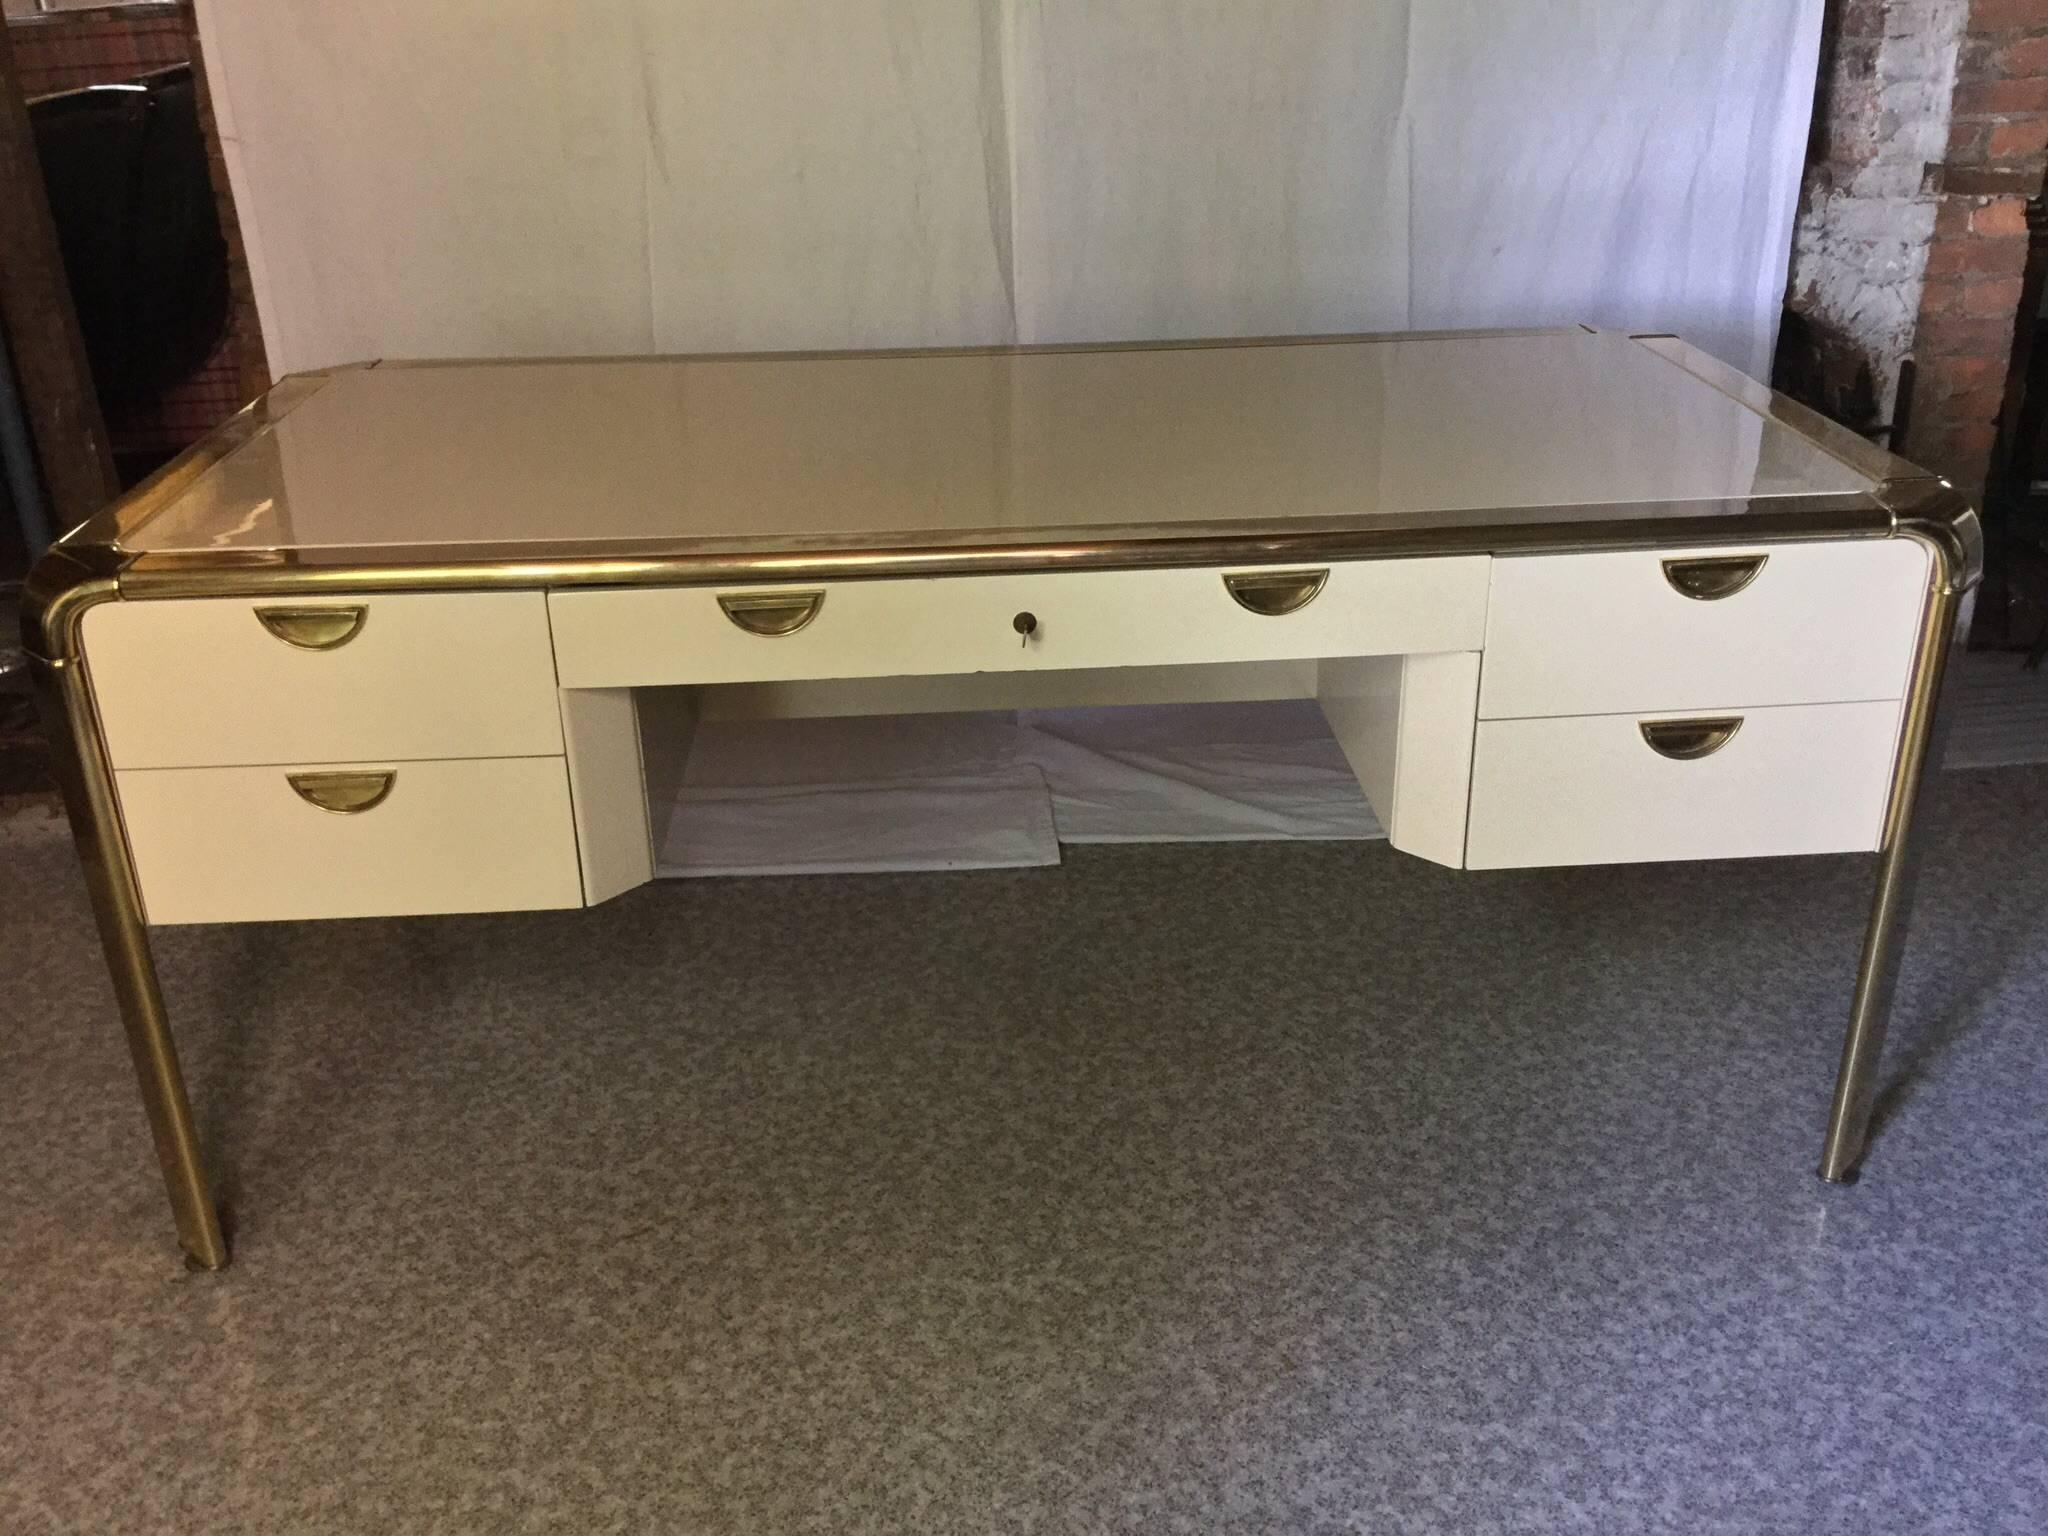 This desk is straight out of a retired executives office at the Boston Institute of Art.
It's top craftsmanship here. The size is grand, the condition is excellent. The brass shines with light patina here and there. The paint color is an antique